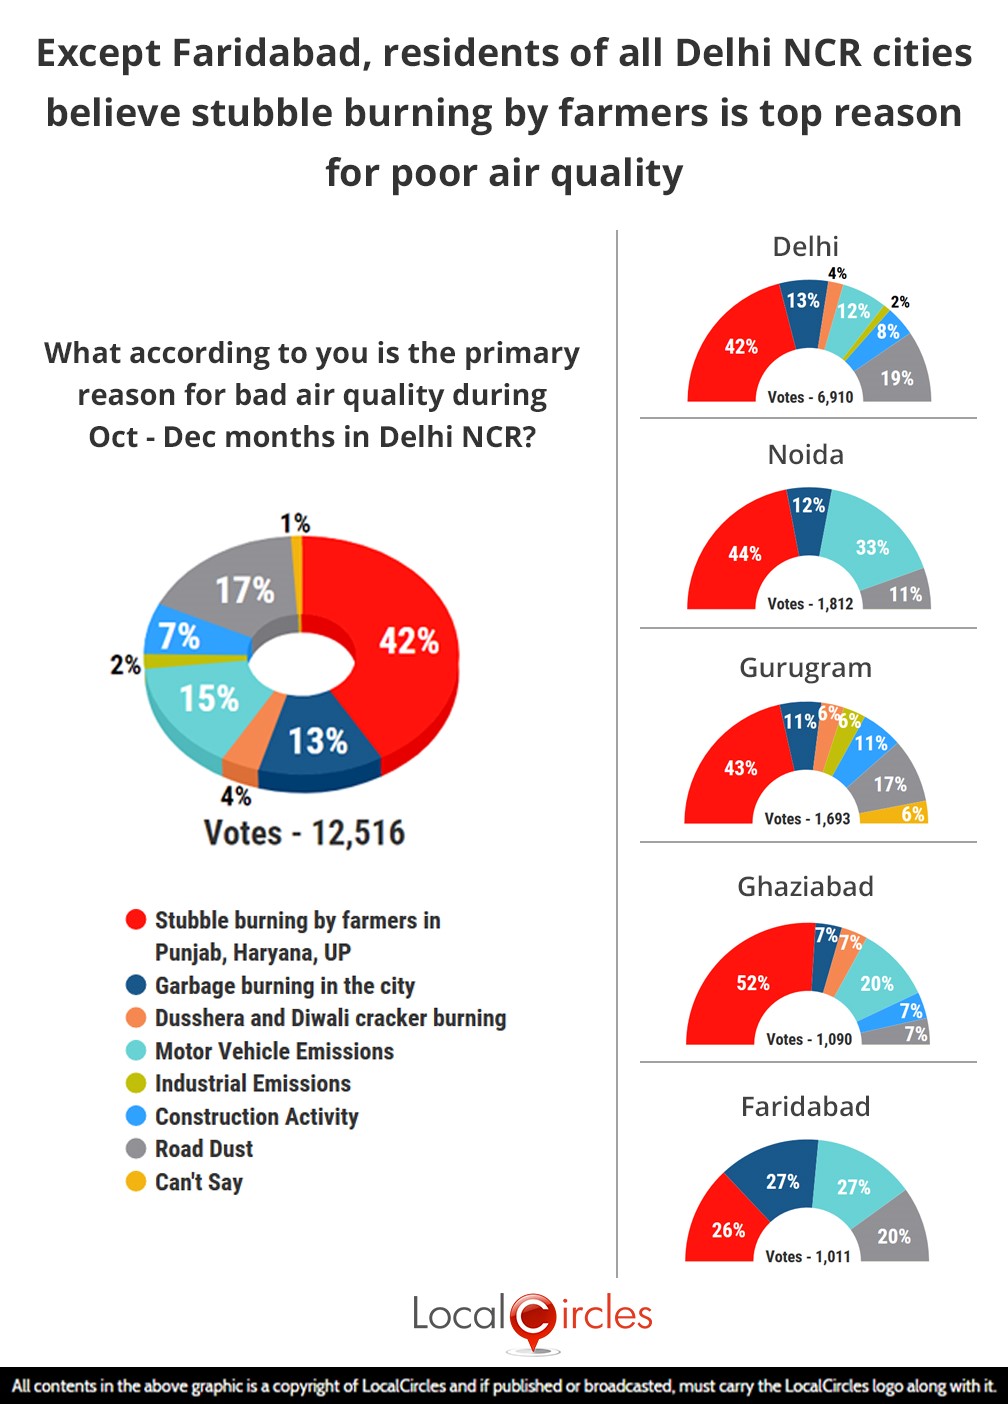 LocalCircles Poll - Except Faridabad, residents of all Delhi NCR cities believe stubble burning by farmers is top reason for poor air quality